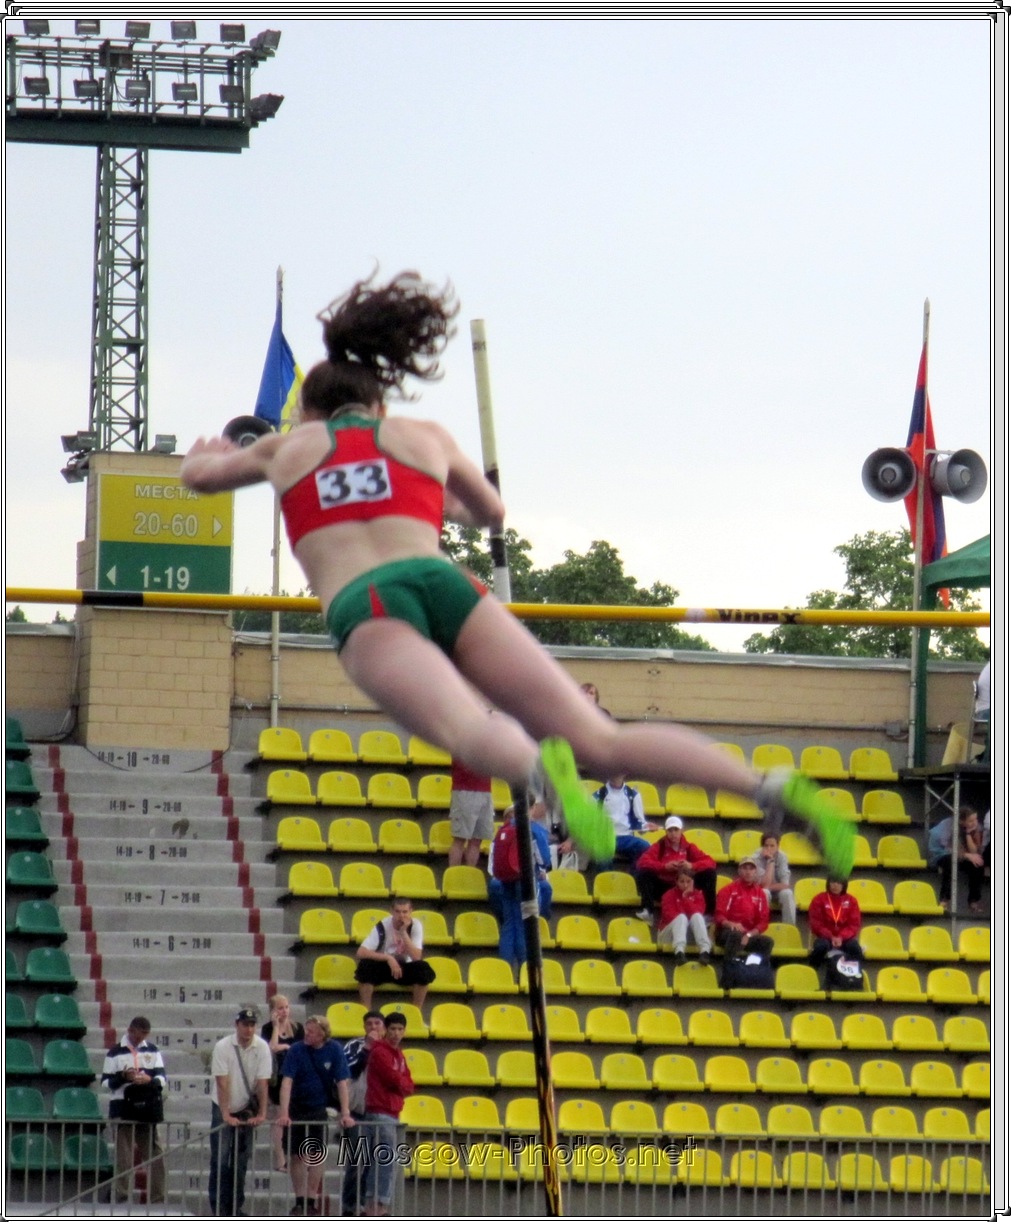 European Youth Olympic Trials 2010